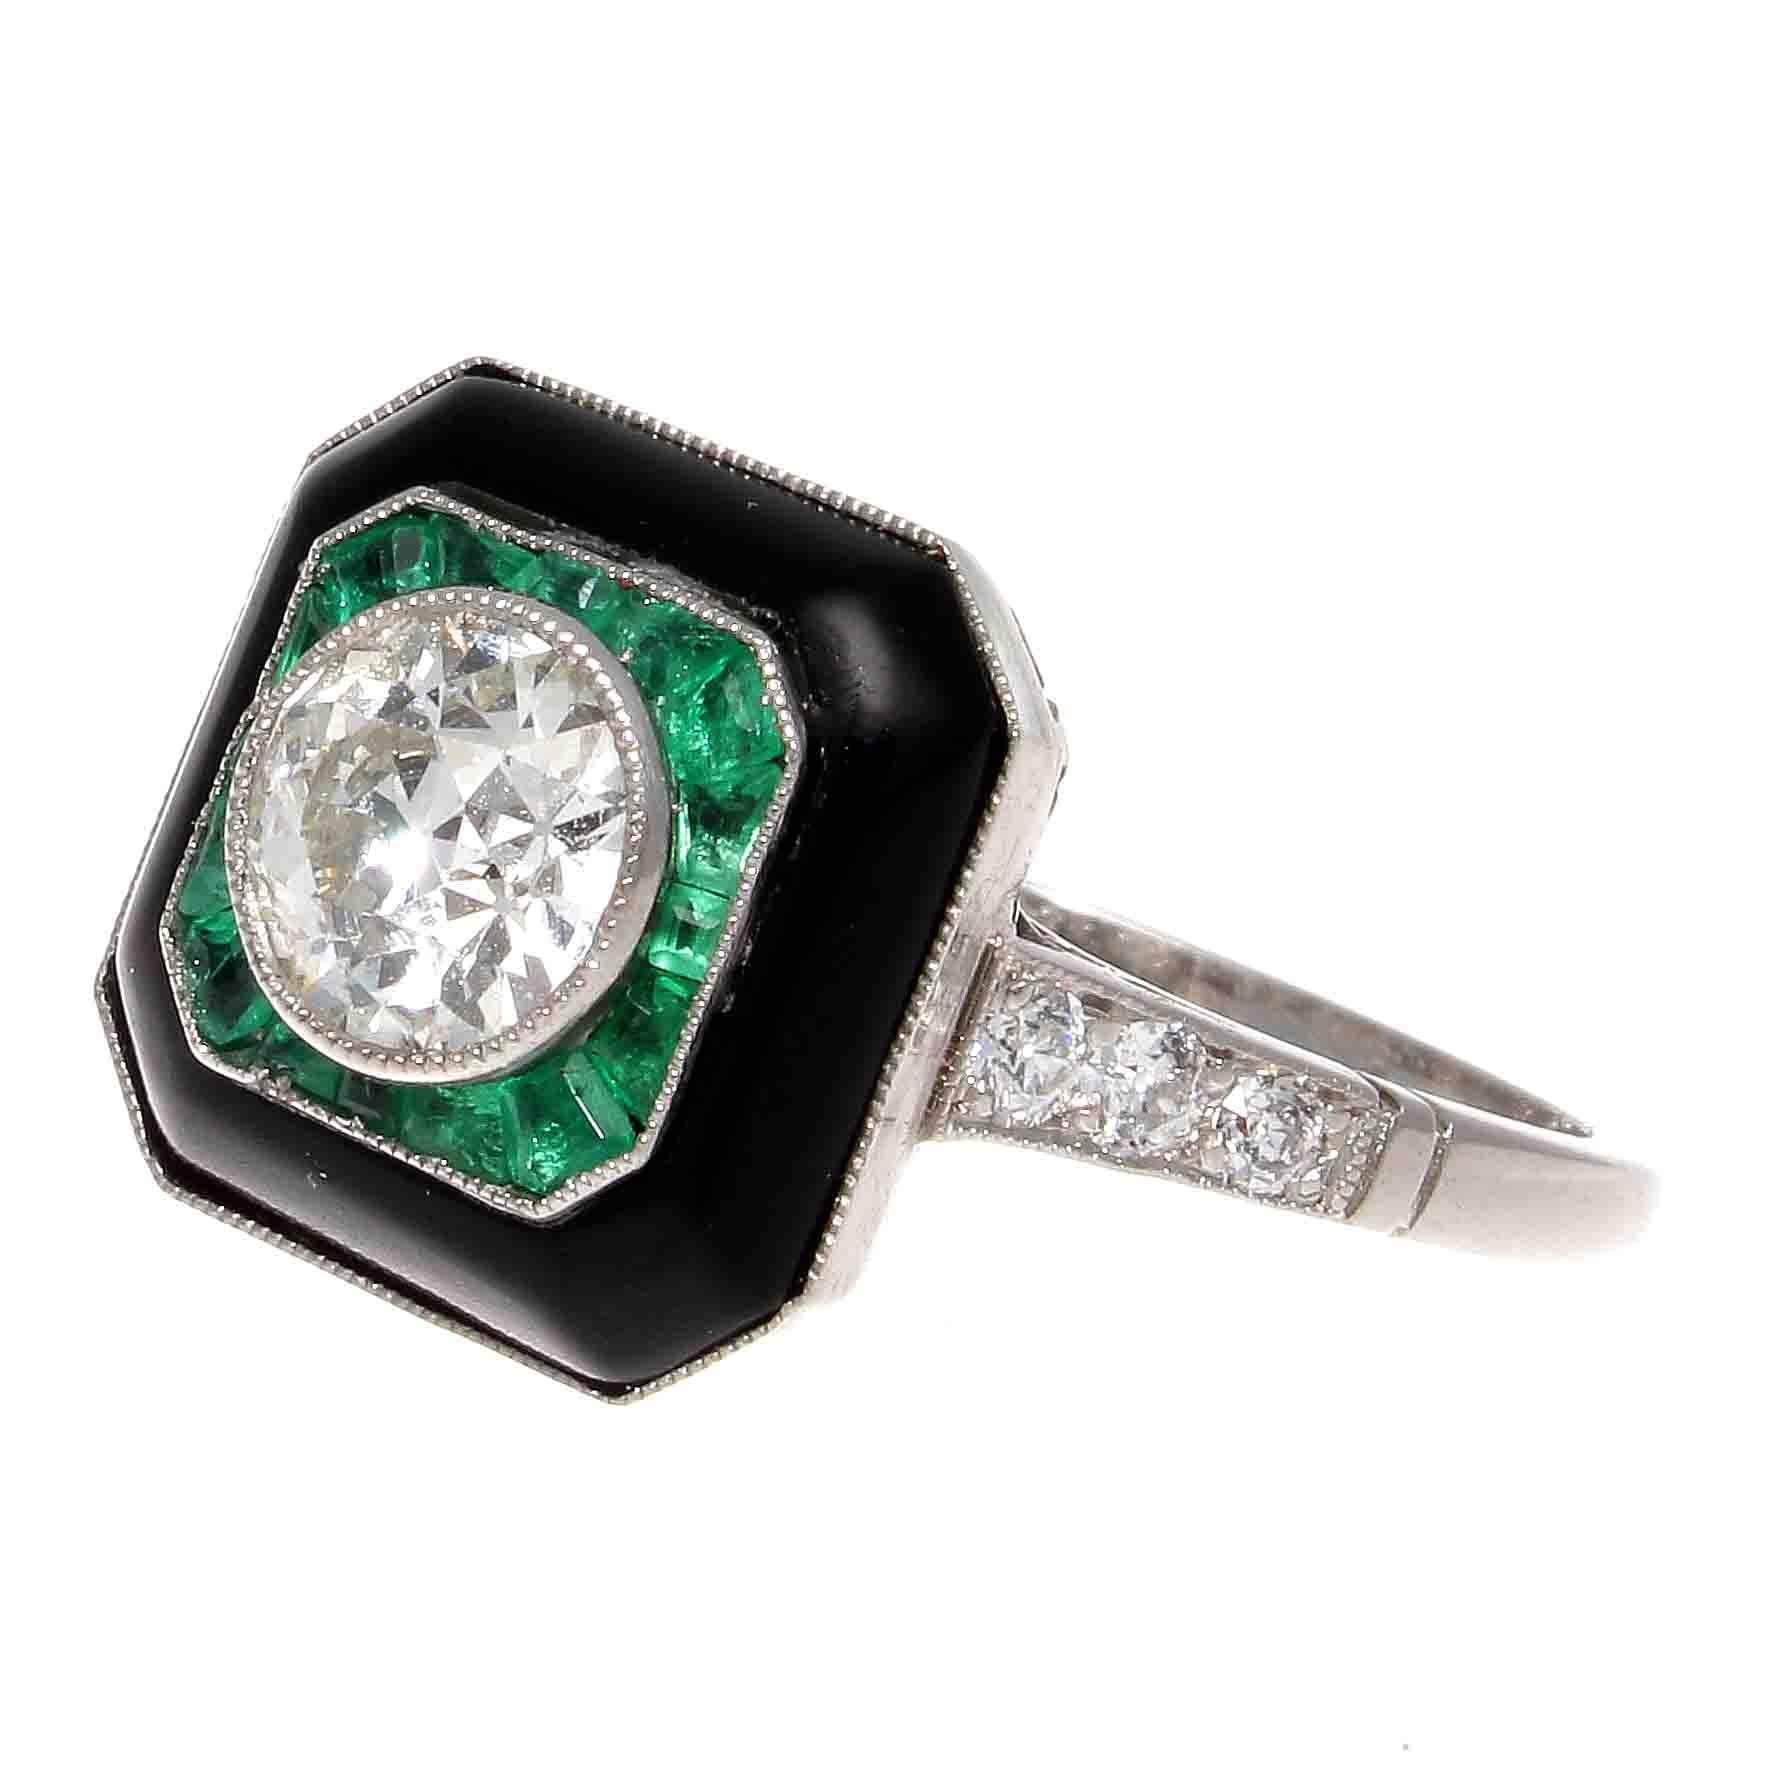 Sumptuous color and design to reinvigorate the Art Deco style of old to new. Featuring a 0.87 carat old European cut diamond that is I color, SI1 clarity. Wrapped in layers of glowing green emeralds and jet black onyx. Hand crafted in